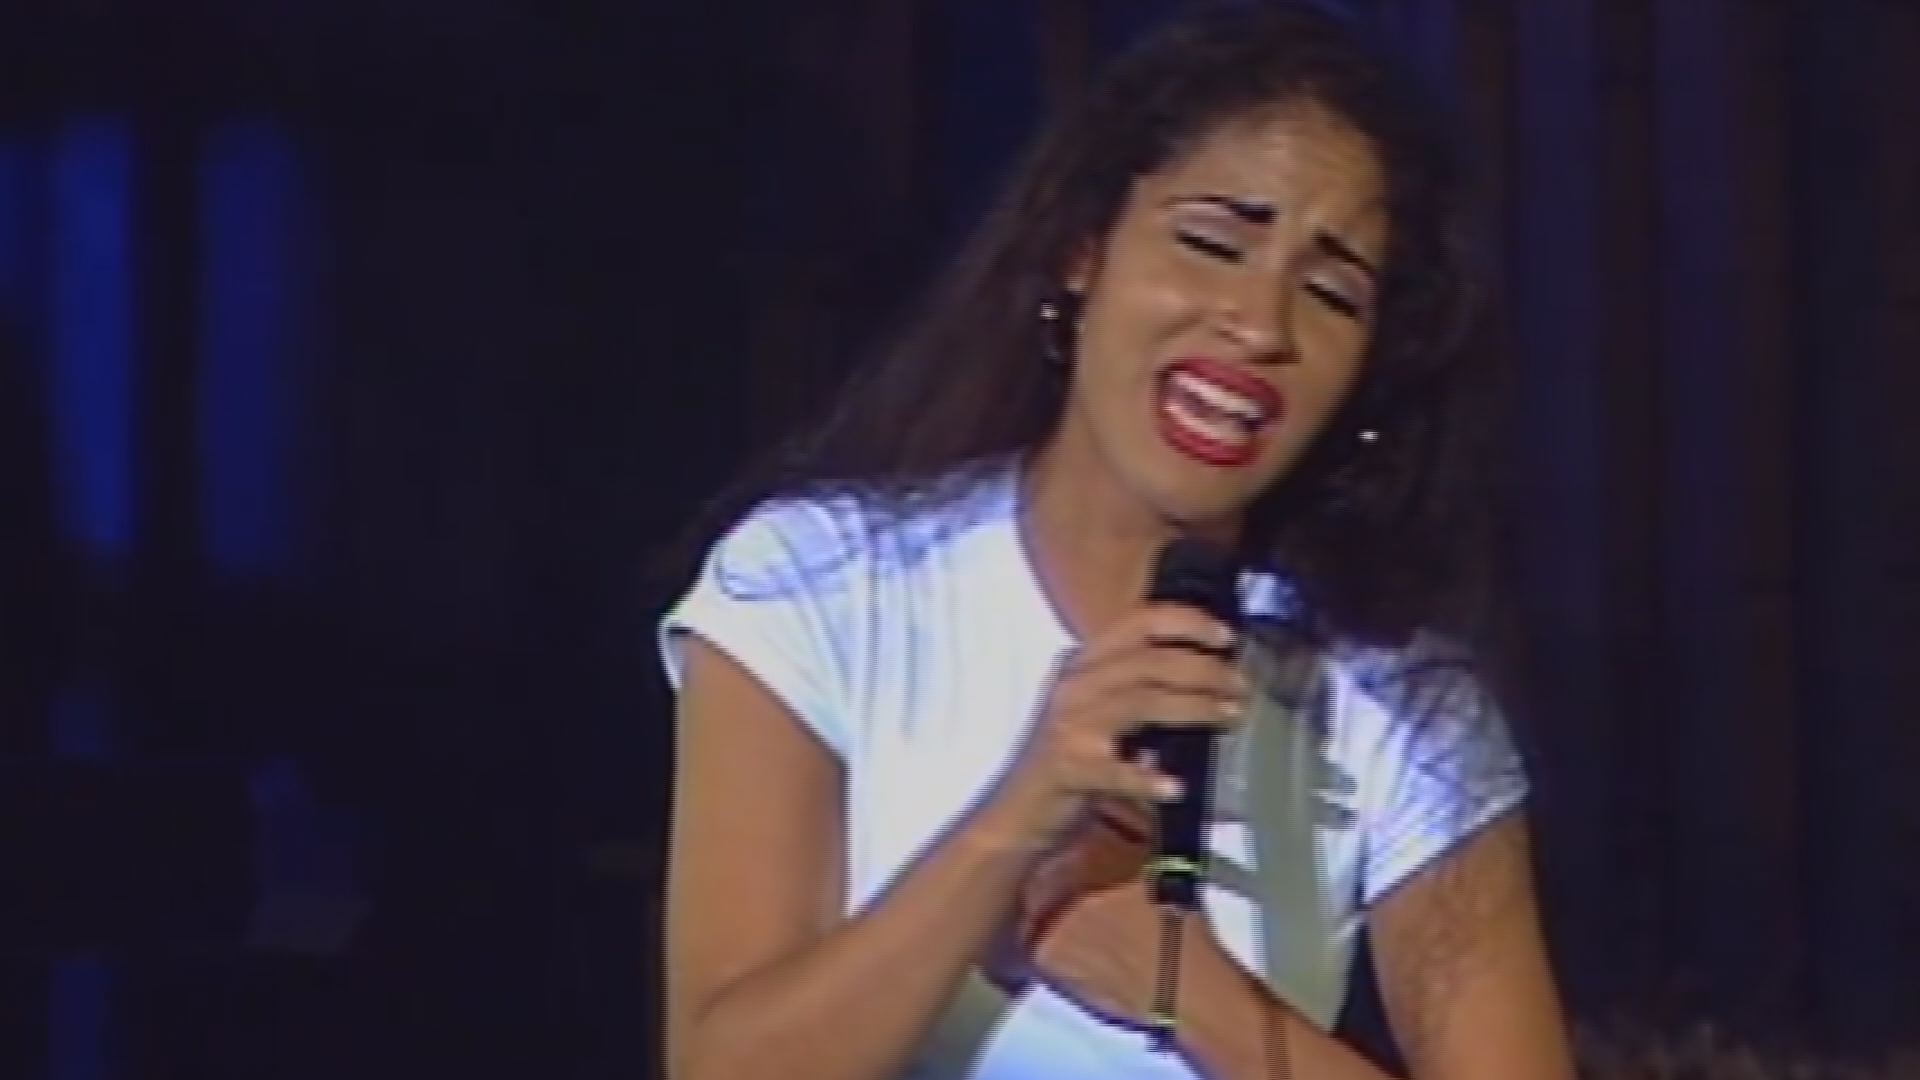 12news.com | Examining the rise and death of Selena, the 'Queen of Tejano'